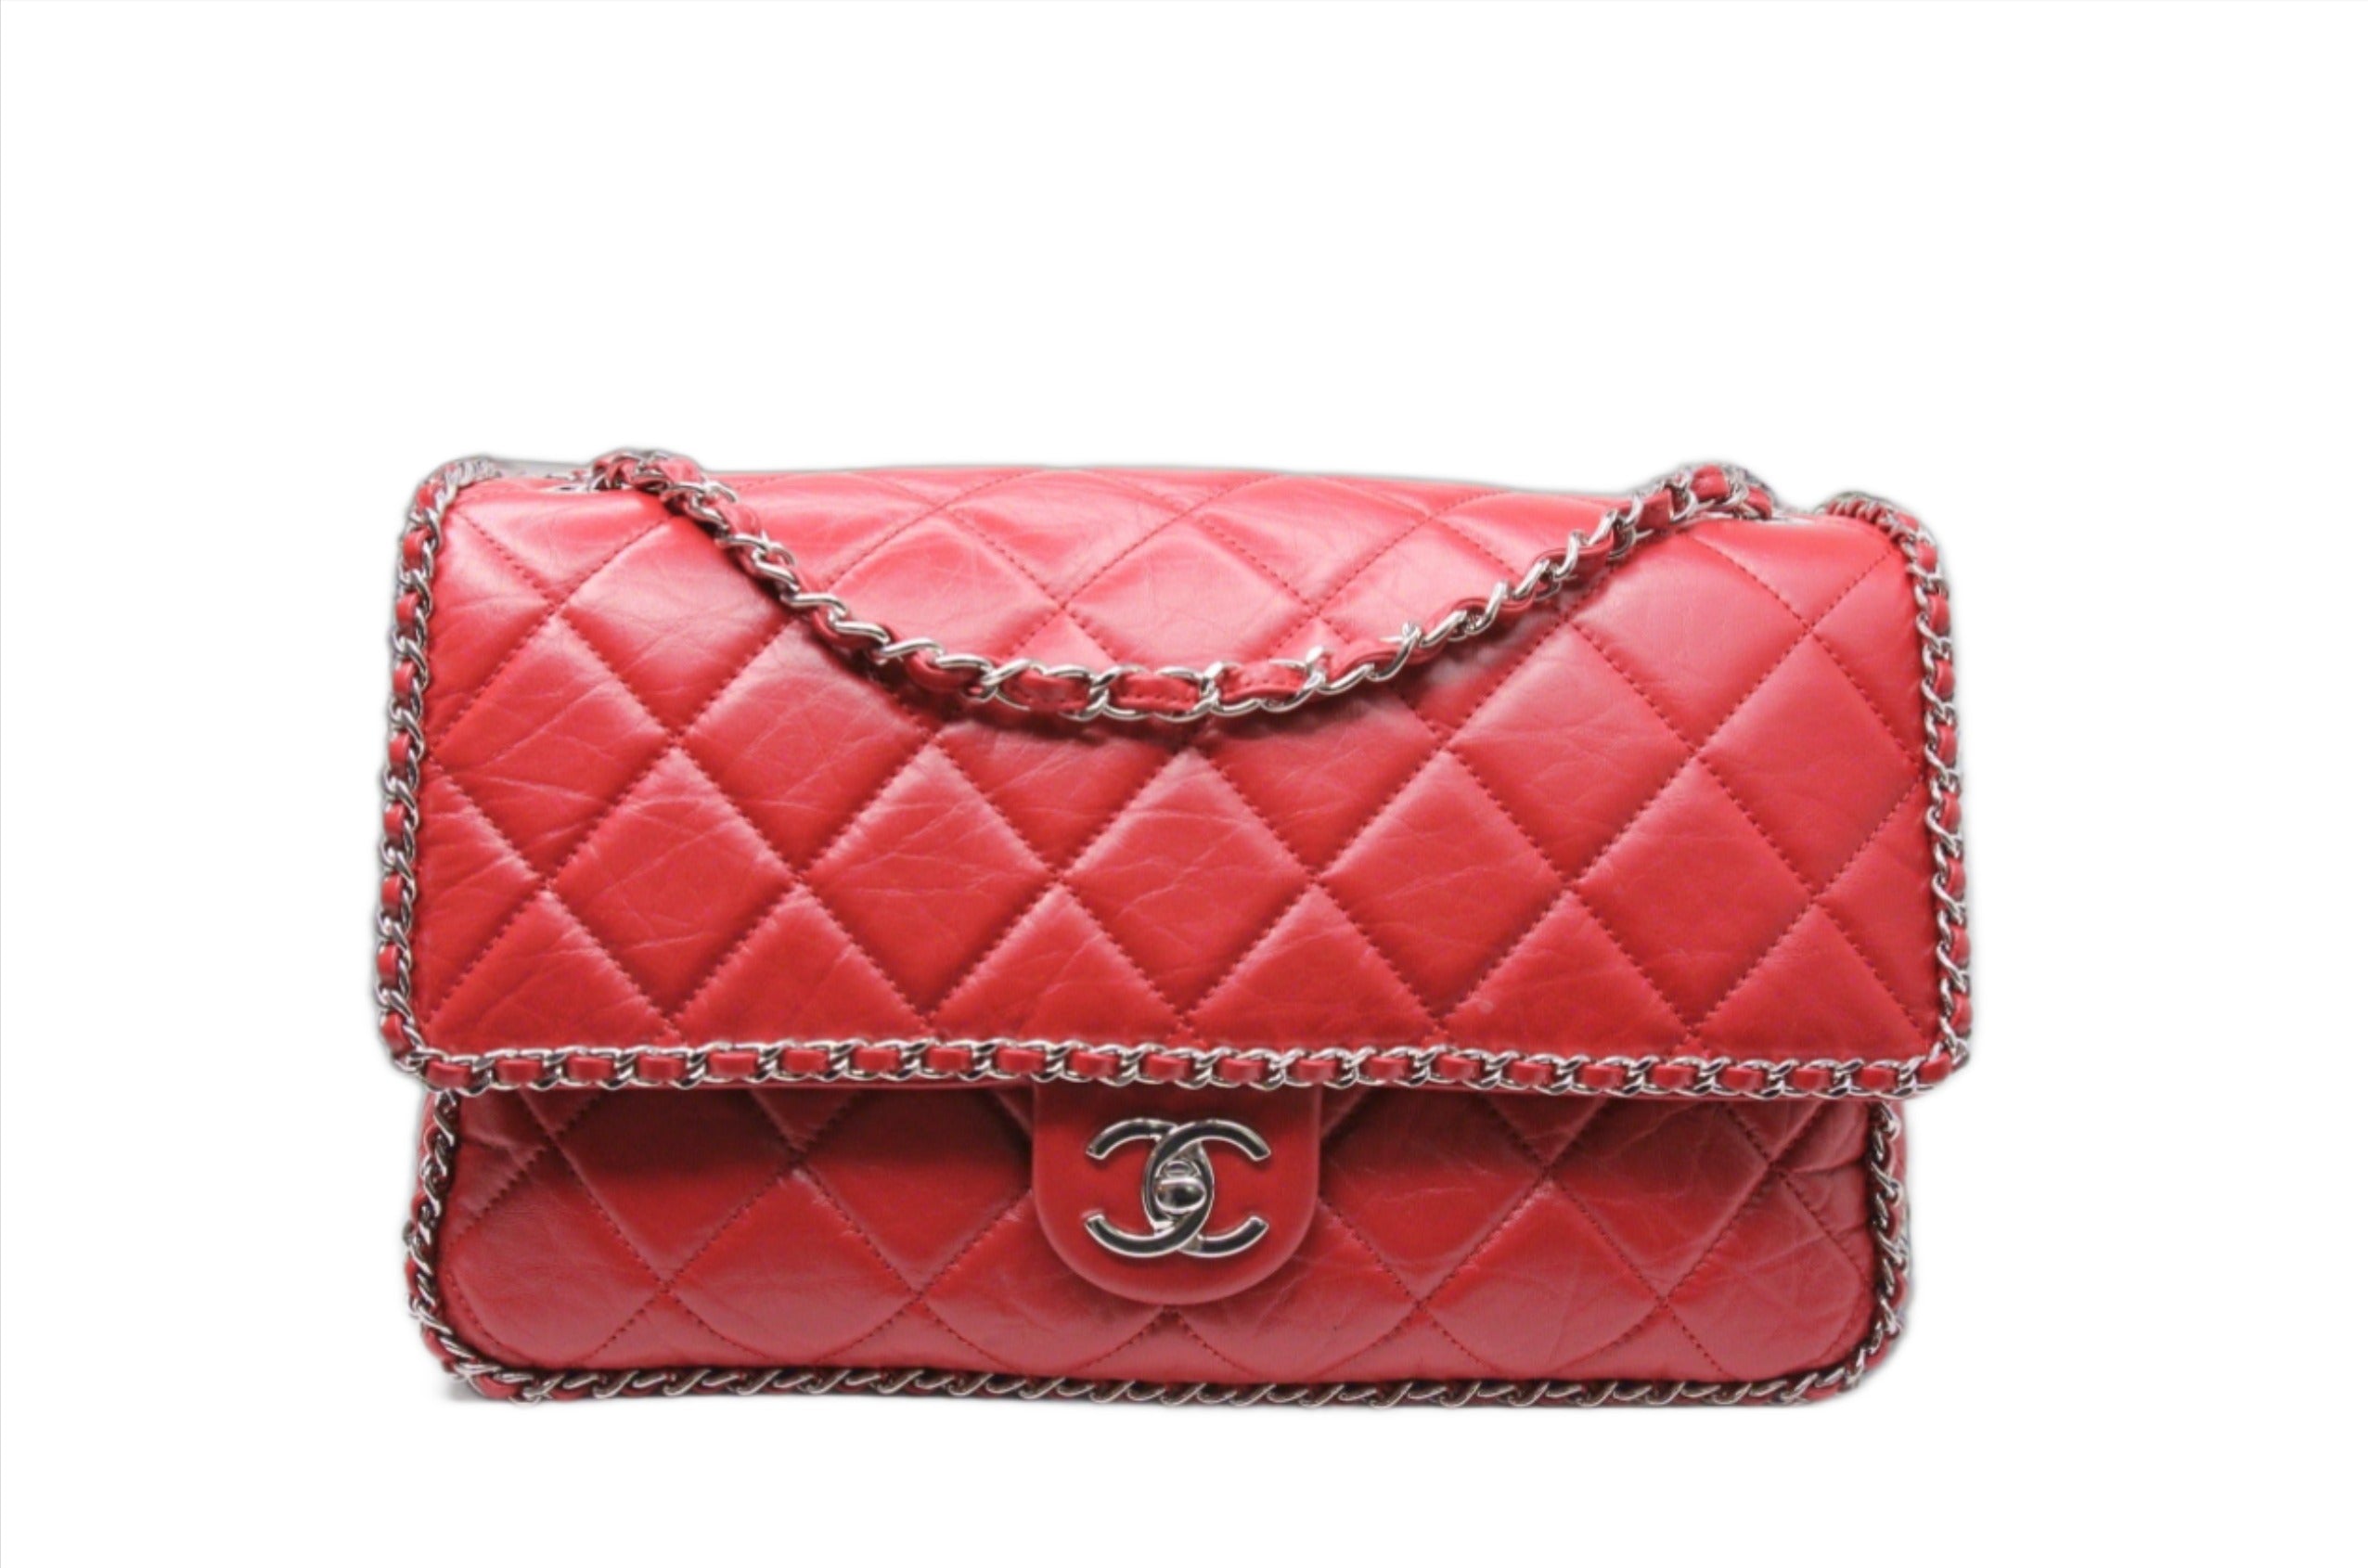 Front of large Chanel flap finished in aged red calfskin